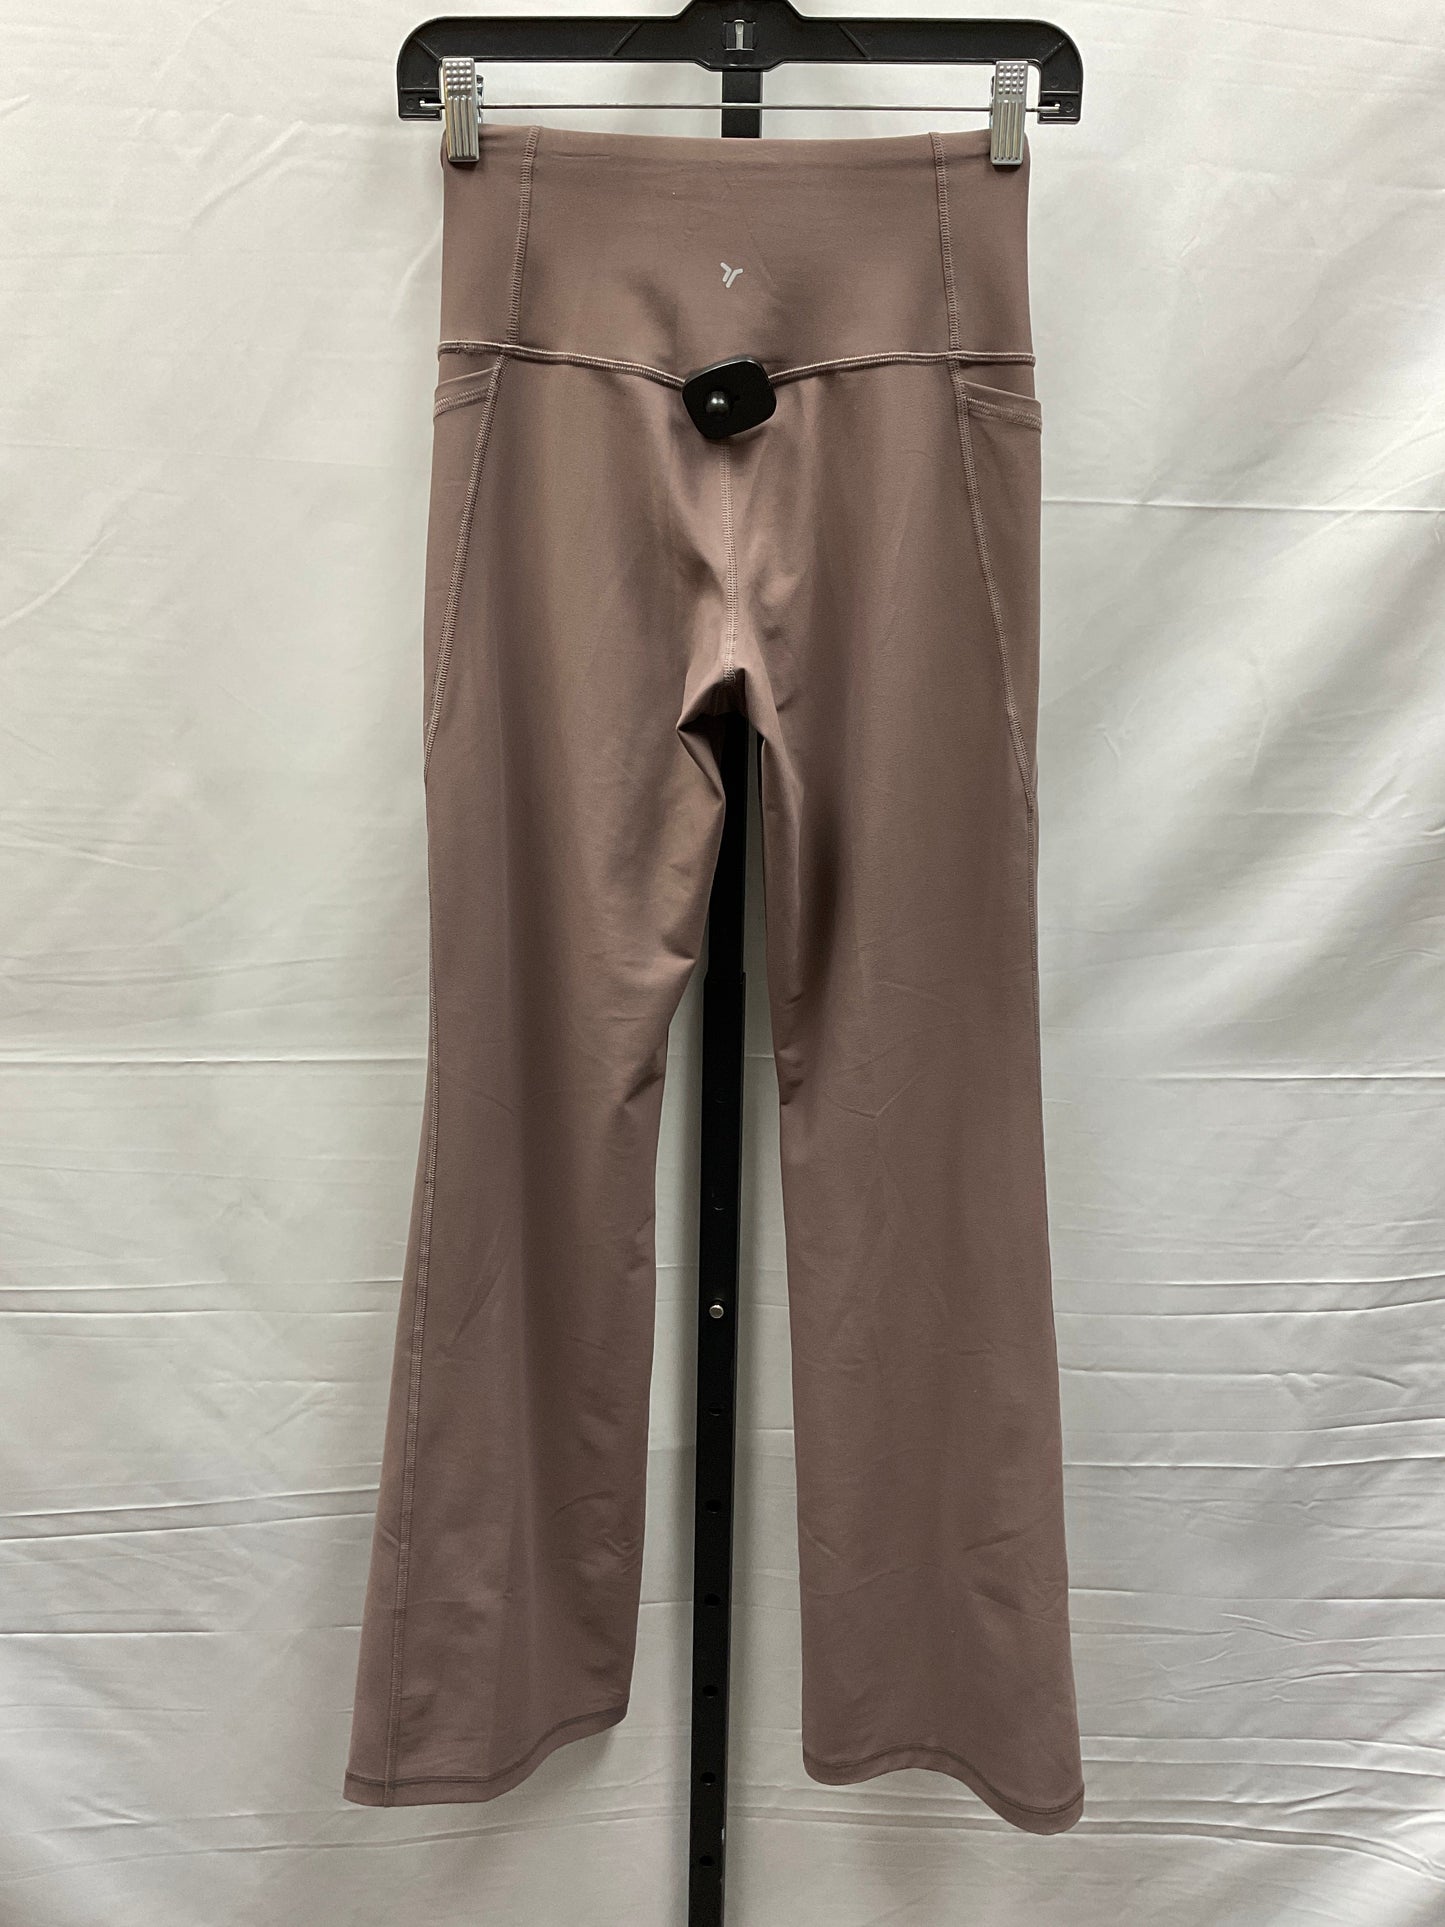 Brown Athletic Pants Old Navy, Size M